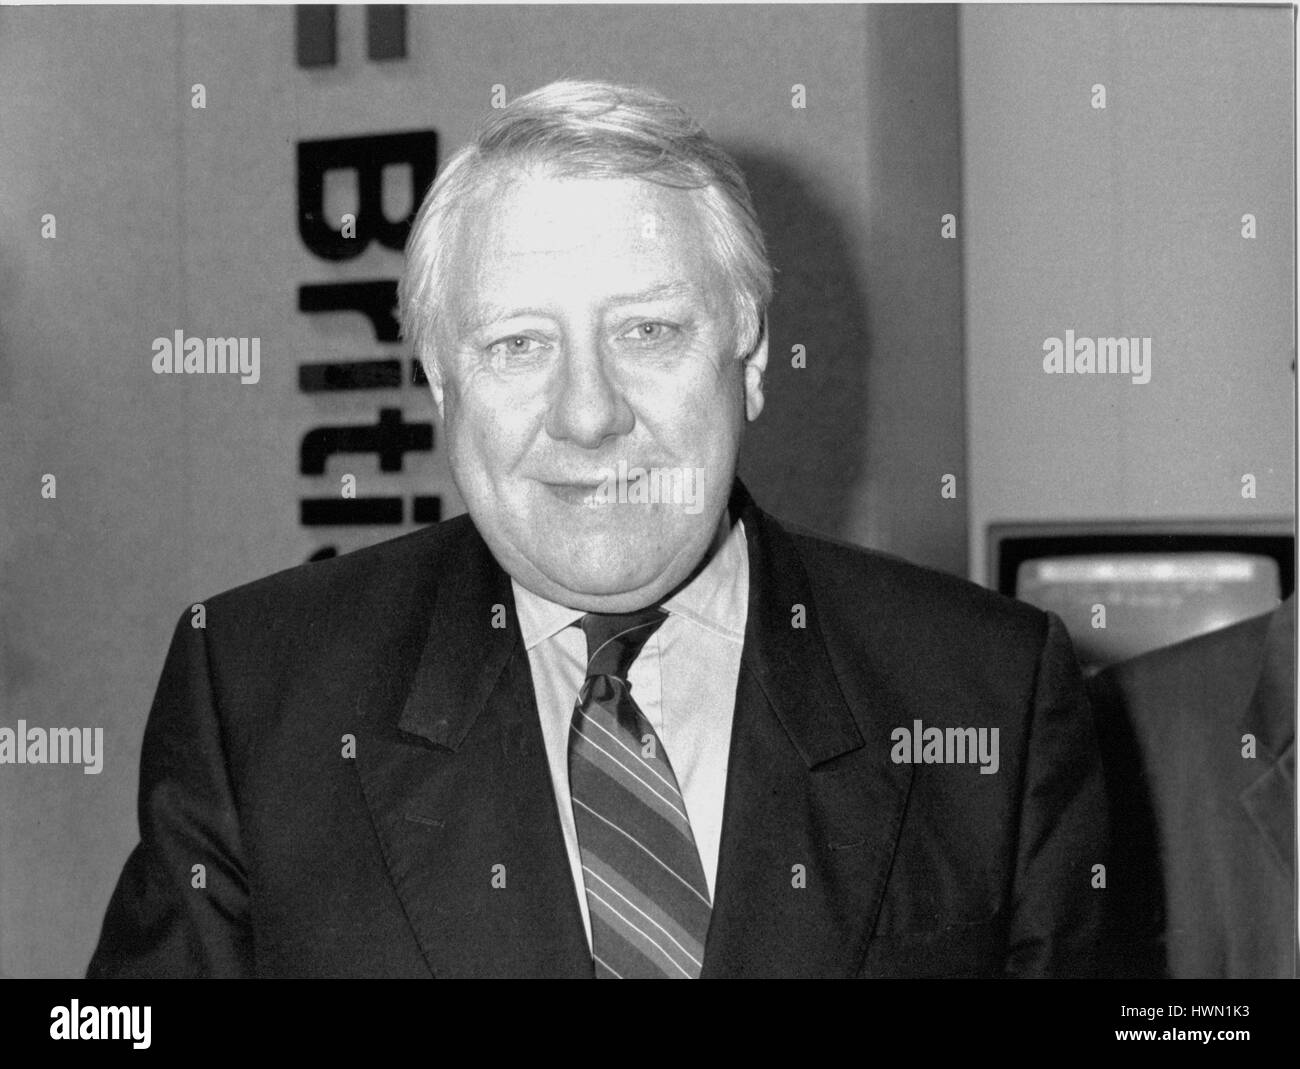 Rt. Hon. Roy Hattersley, Deputy Leader of the Labour Party and Labour Member of Parliament for Birmingham  Sparkbrook, attends the party conference in Brighton, England on October 1, 1991. Stock Photo